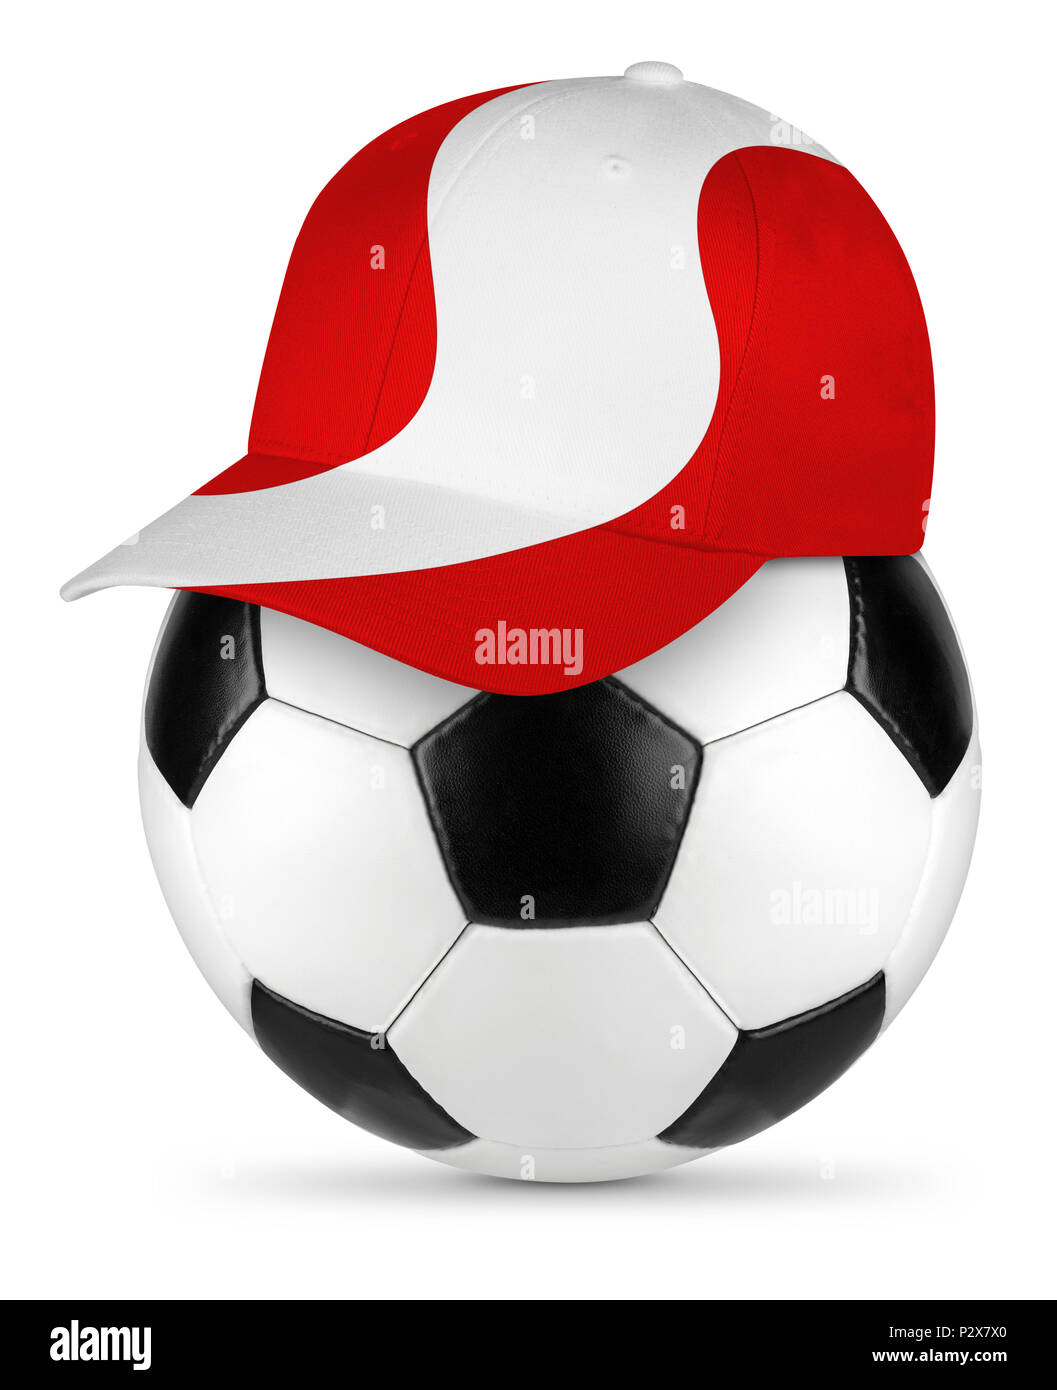 Classic black white leather soccer ball peru peruvian flag baseball fan cap isolated background sport football concept Stock Photo